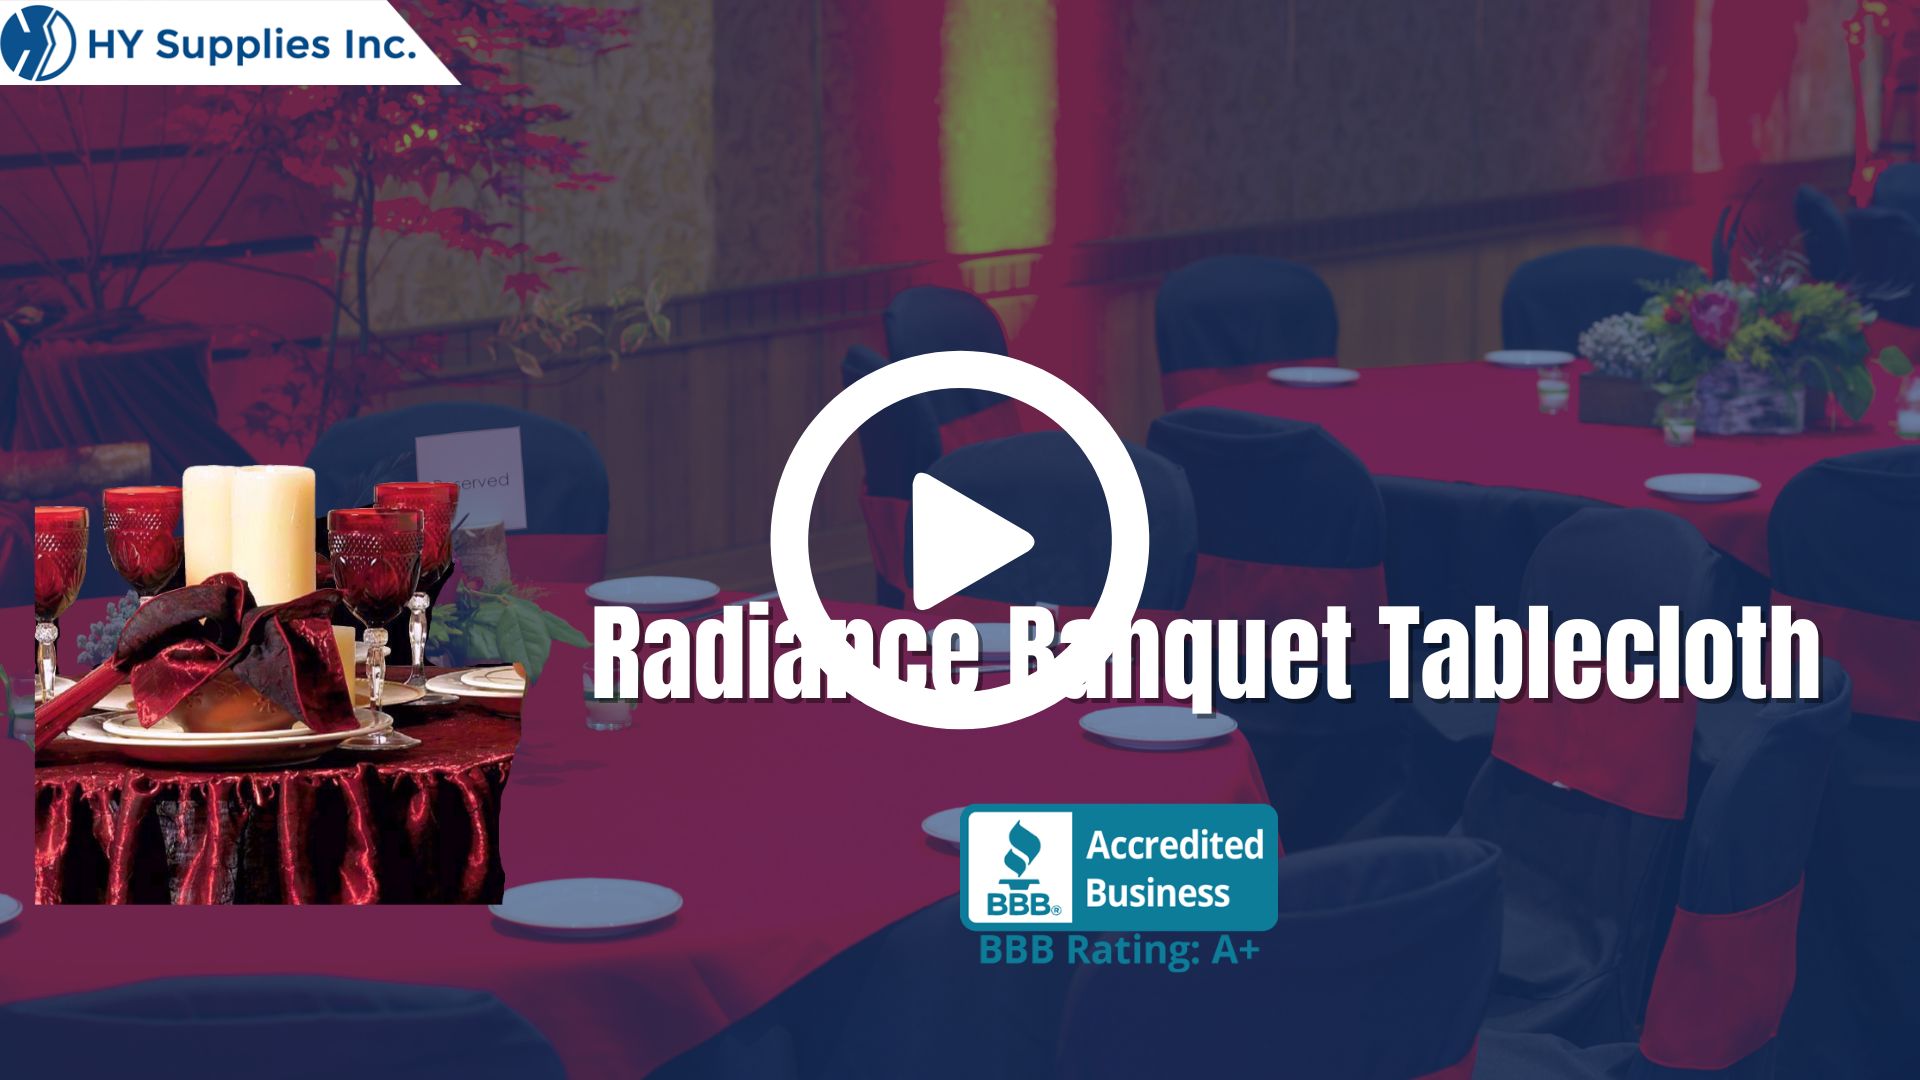 Radiance Banquet Tablecloth